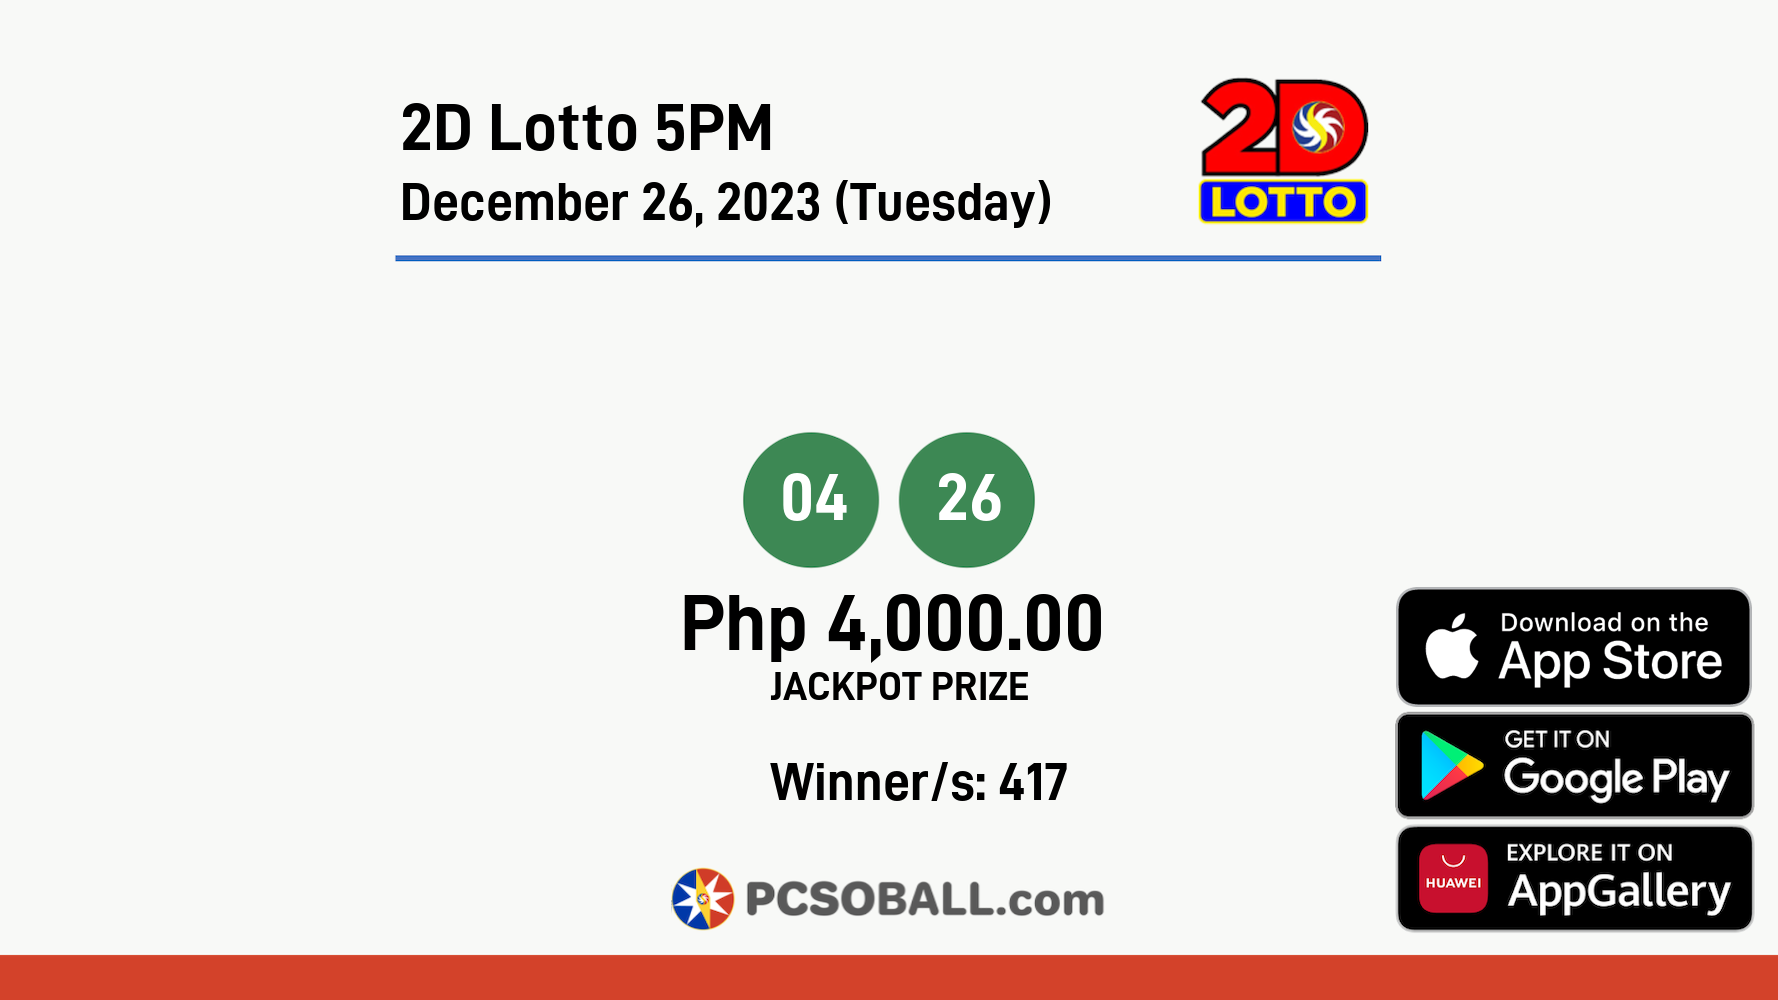 2D Lotto 5PM December 26, 2023 (Tuesday) Result